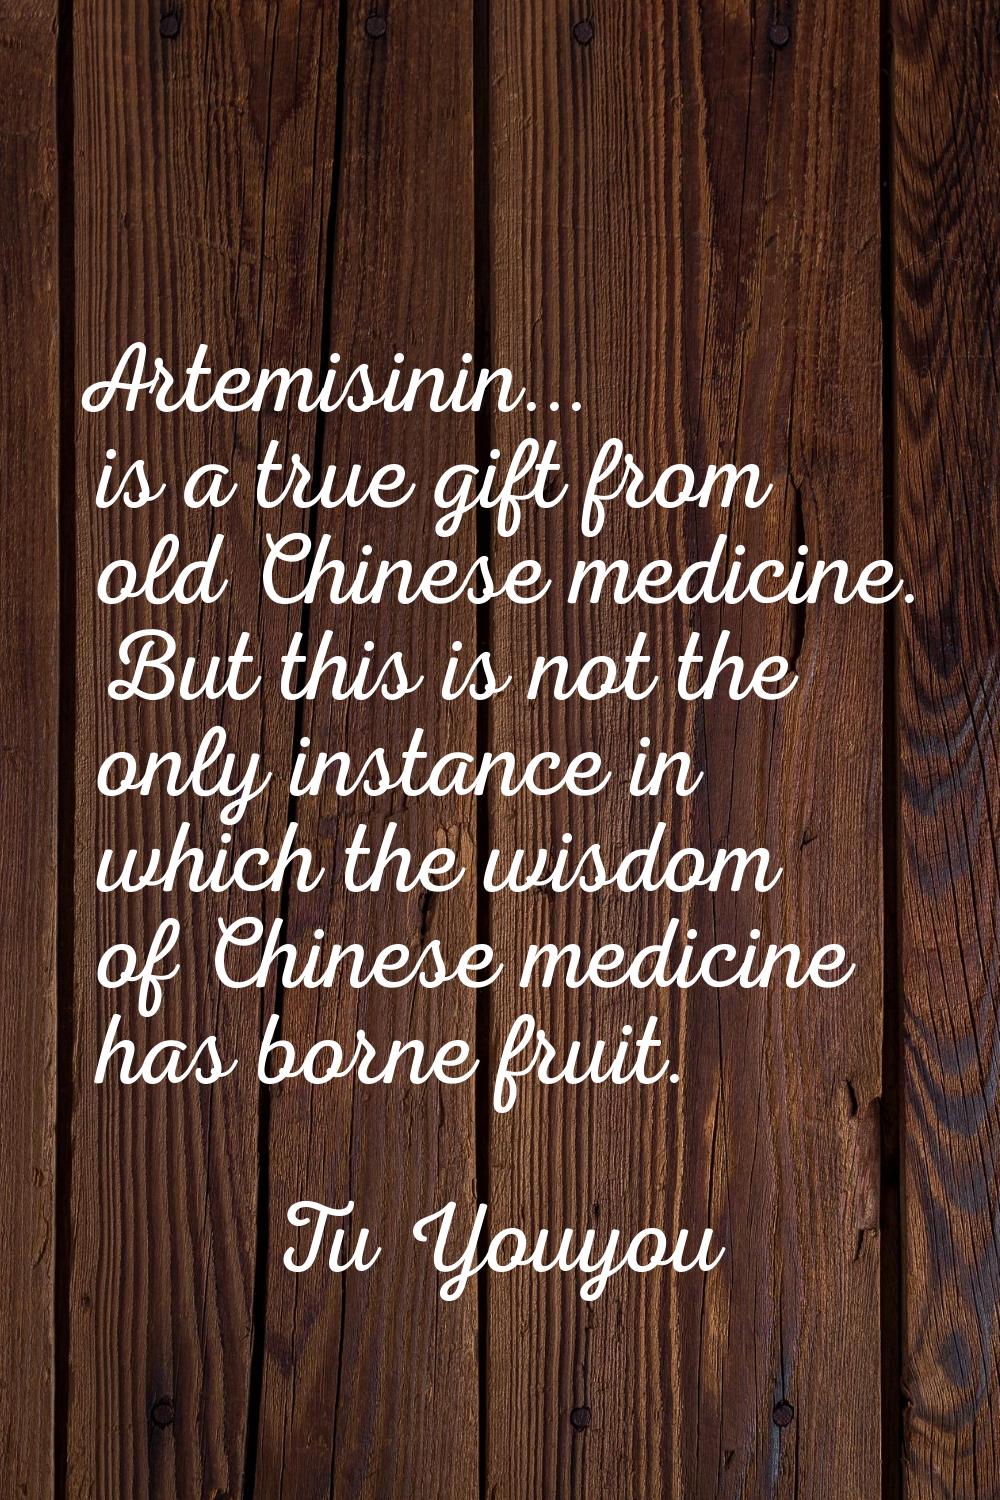 Artemisinin... is a true gift from old Chinese medicine. But this is not the only instance in which